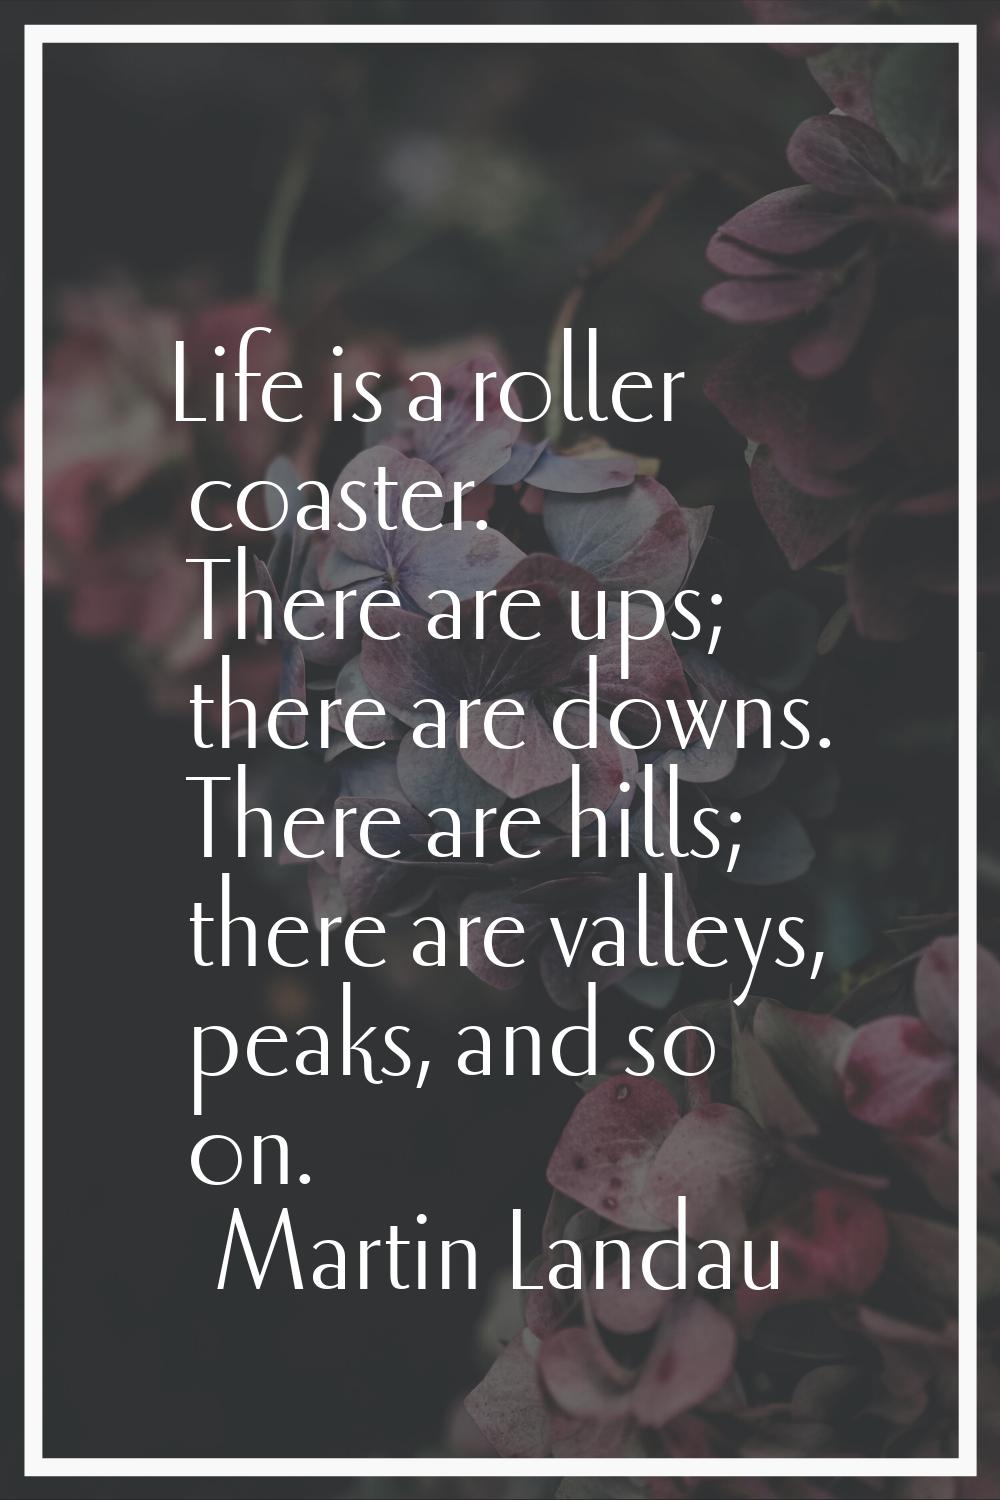 Life is a roller coaster. There are ups; there are downs. There are hills; there are valleys, peaks